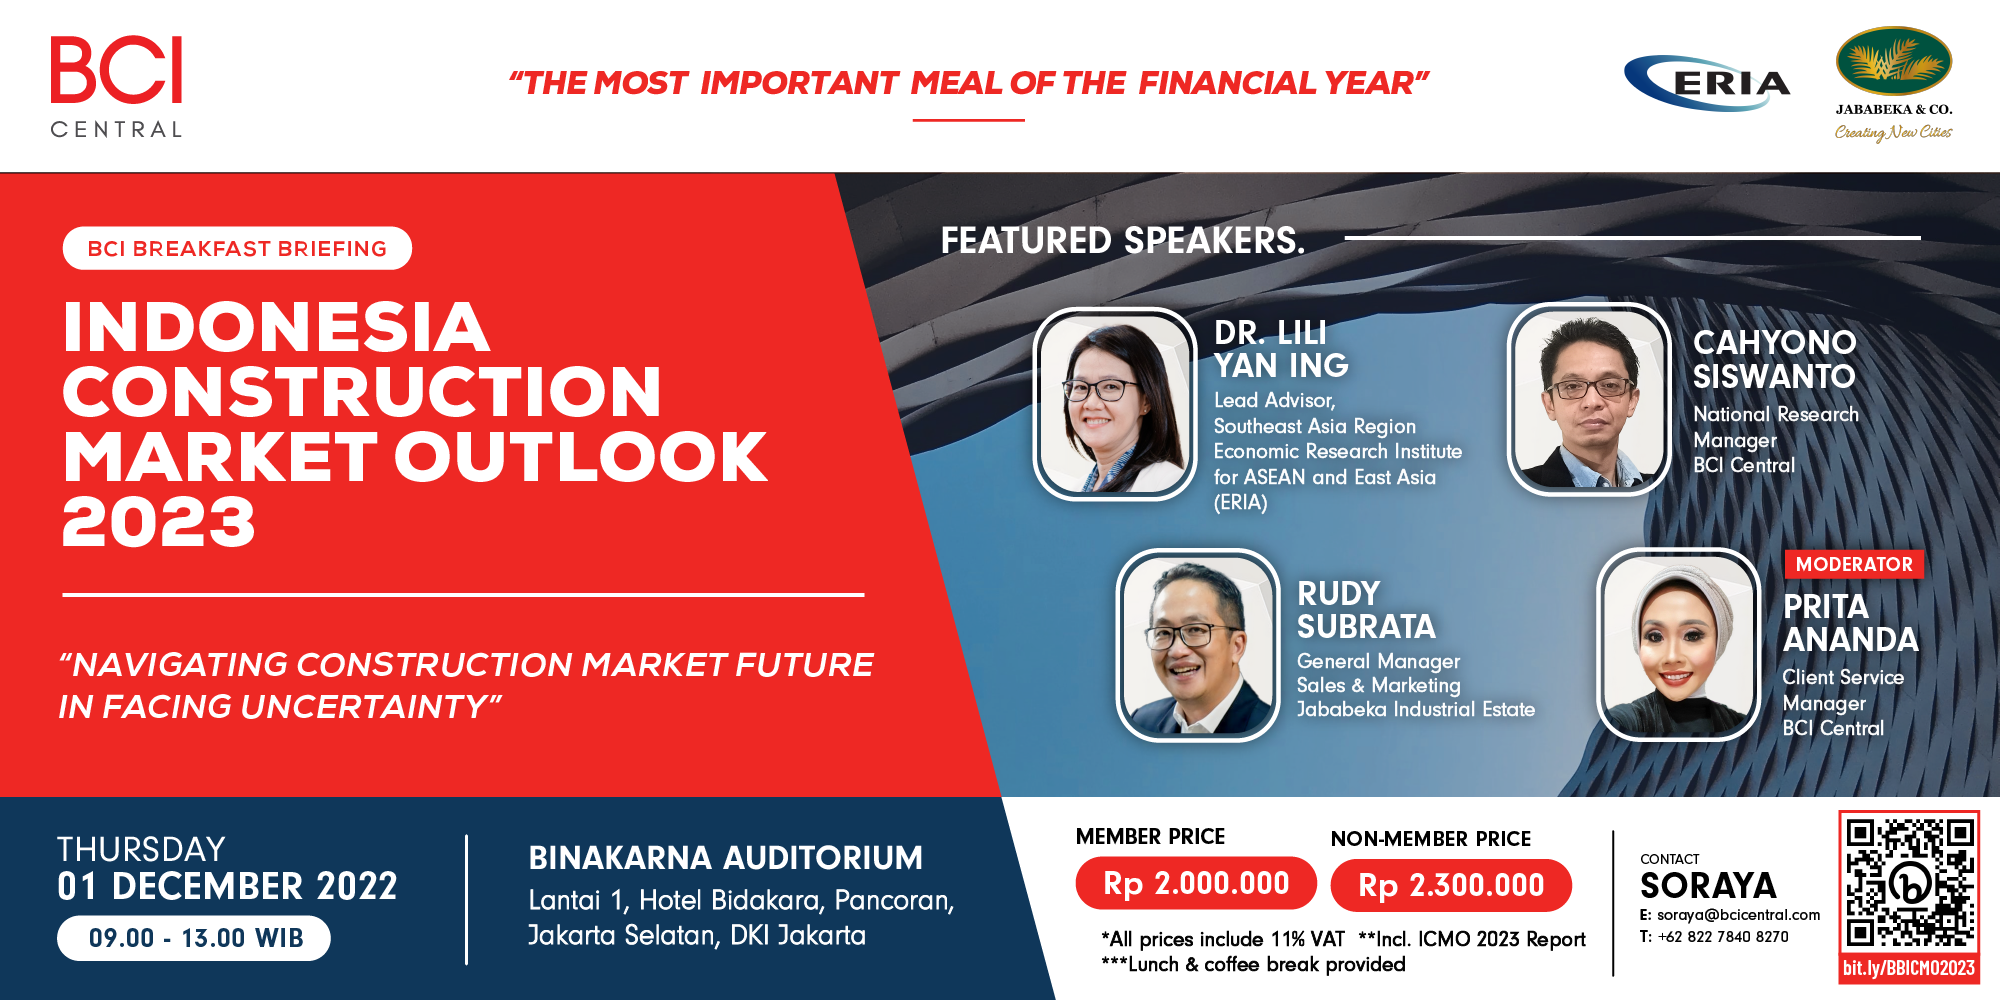 BCI Breakfast Briefing Indonesia Construction Market Outlook 2023